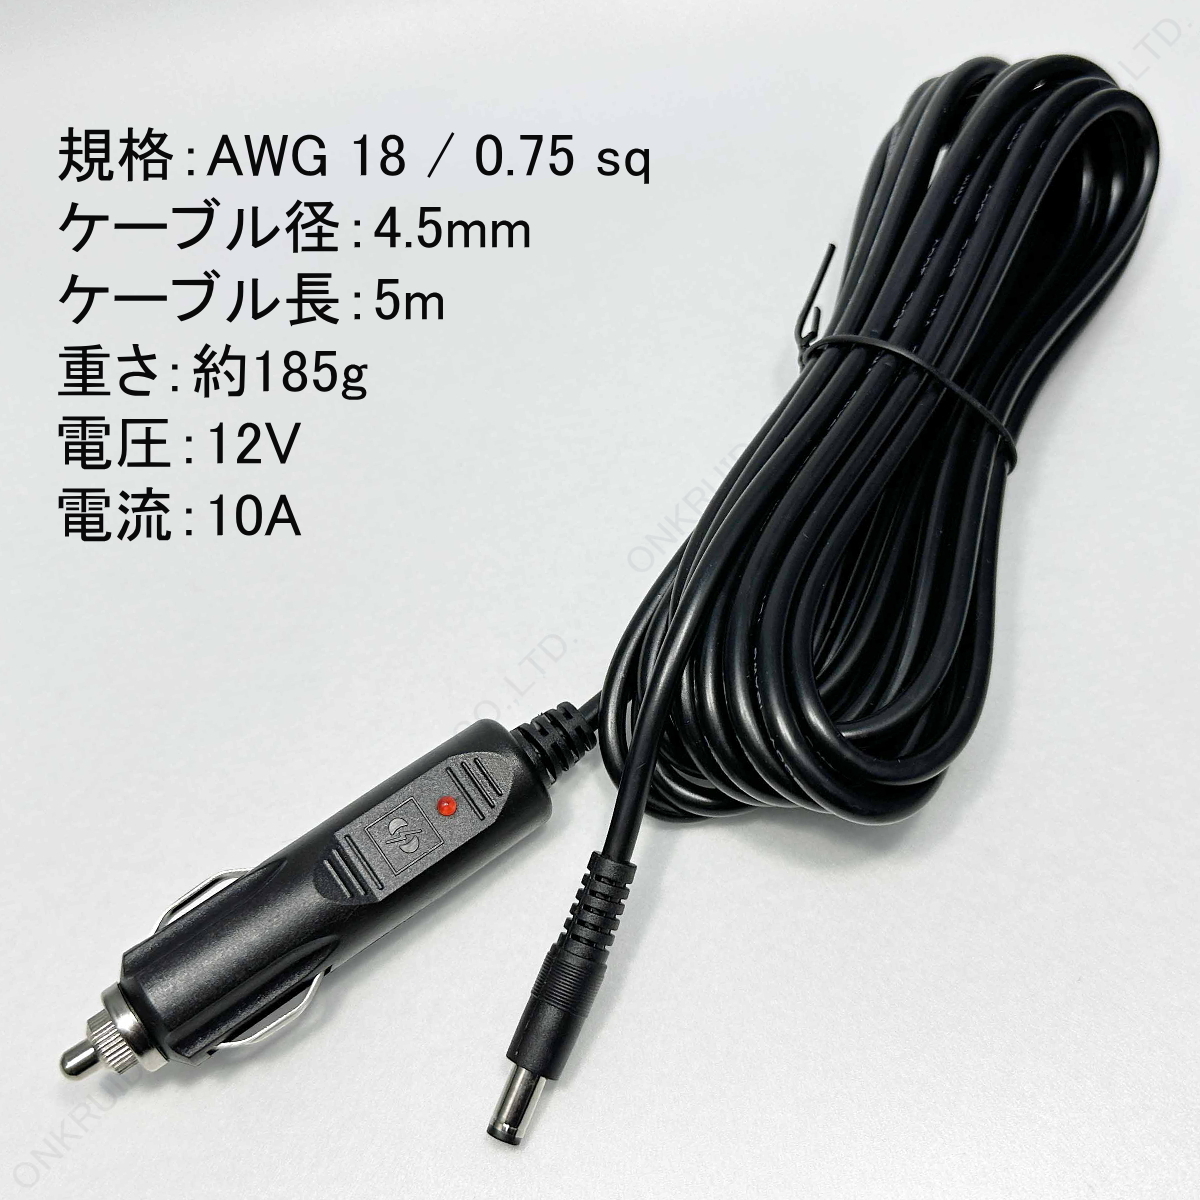  inside diameter 2.1mm outer diameter 5.5mm 12V cigar socket 5M charge cable 10A 120W DC plug power supply extension in-vehicle rear seat cigar plug lighter 24V combined use common use 